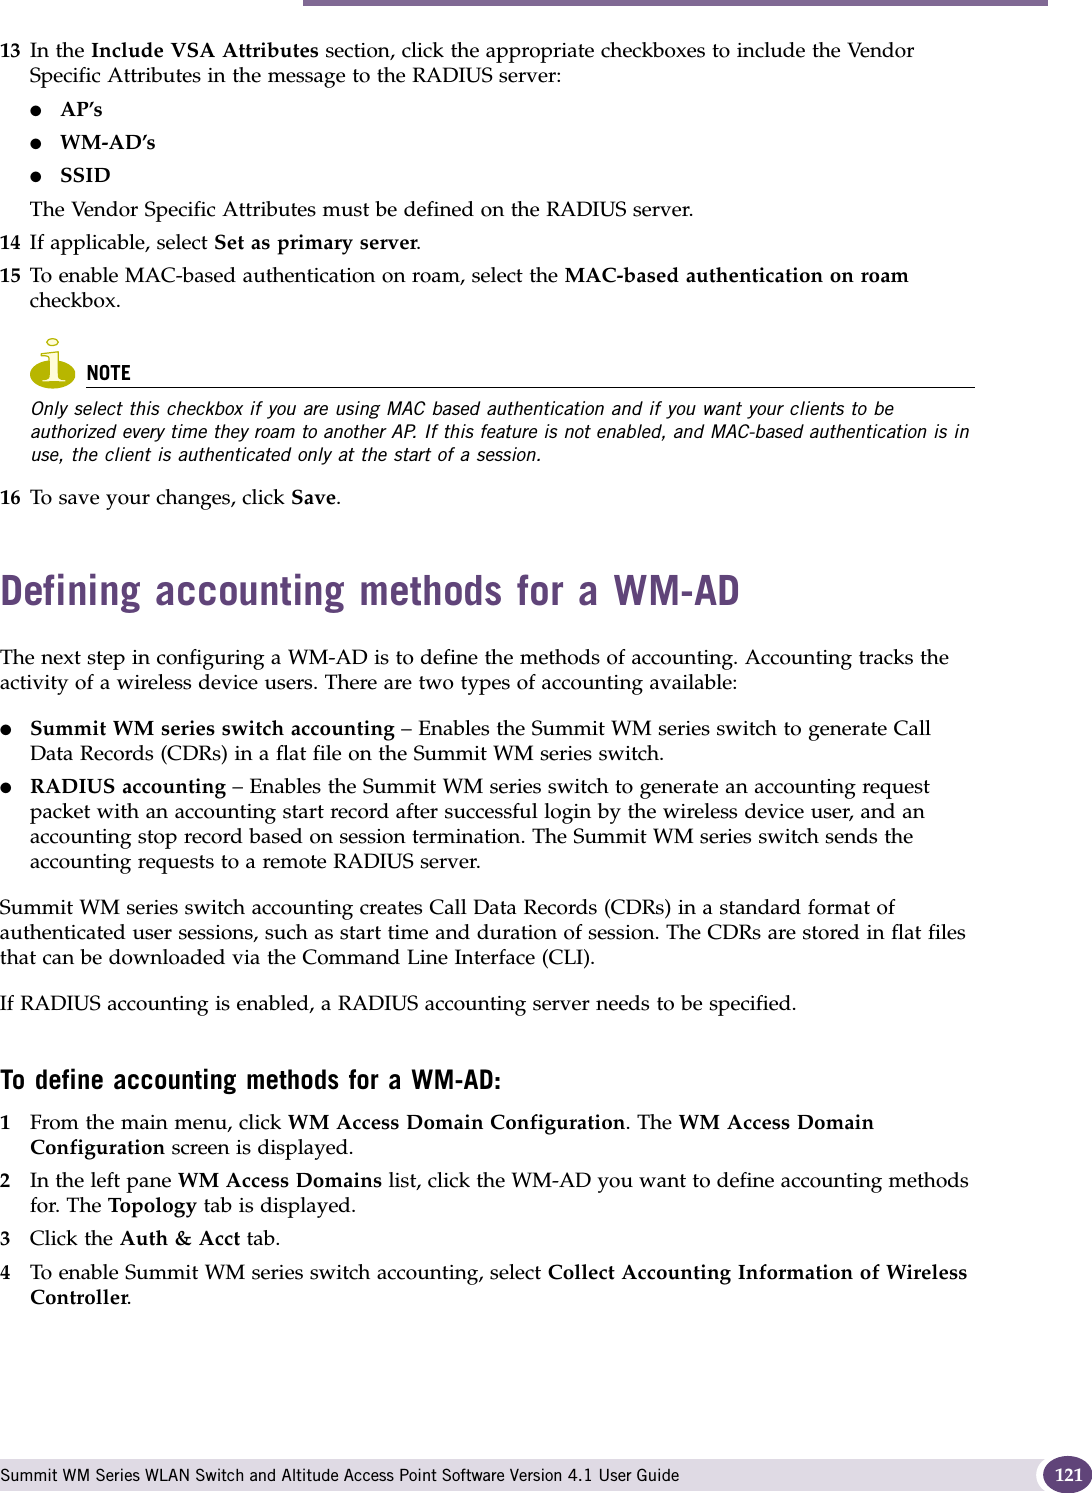 Defining accounting methods for a WM-AD Summit WM Series WLAN Switch and Altitude Access Point Software Version 4.1 User Guide 12113 In the Include VSA Attributes section, click the appropriate checkboxes to include the Vendor Specific Attributes in the message to the RADIUS server:●AP’s ●WM-AD’s●SSID The Vendor Specific Attributes must be defined on the RADIUS server.14 If applicable, select Set as primary server.15 To enable MAC-based authentication on roam, select the MAC-based authentication on roam checkbox.NOTEOnly select this checkbox if you are using MAC based authentication and if you want your clients to be authorized every time they roam to another AP. If this feature is not enabled, and MAC-based authentication is in use, the client is authenticated only at the start of a session.16 To save your changes, click Save.Defining accounting methods for a WM-ADThe next step in configuring a WM-AD is to define the methods of accounting. Accounting tracks the activity of a wireless device users. There are two types of accounting available:●Summit WM series switch accounting – Enables the Summit WM series switch to generate Call Data Records (CDRs) in a flat file on the Summit WM series switch.●RADIUS accounting – Enables the Summit WM series switch to generate an accounting request packet with an accounting start record after successful login by the wireless device user, and an accounting stop record based on session termination. The Summit WM series switch sends the accounting requests to a remote RADIUS server.Summit WM series switch accounting creates Call Data Records (CDRs) in a standard format of authenticated user sessions, such as start time and duration of session. The CDRs are stored in flat files that can be downloaded via the Command Line Interface (CLI).If RADIUS accounting is enabled, a RADIUS accounting server needs to be specified.To define accounting methods for a WM-AD:1From the main menu, click WM Access Domain Configuration. The WM Access Domain Configuration screen is displayed.2In the left pane WM Access Domains list, click the WM-AD you want to define accounting methods for. The Topology tab is displayed.3Click the Auth &amp; Acct tab.4To enable Summit WM series switch accounting, select Collect Accounting Information of Wireless Controller.